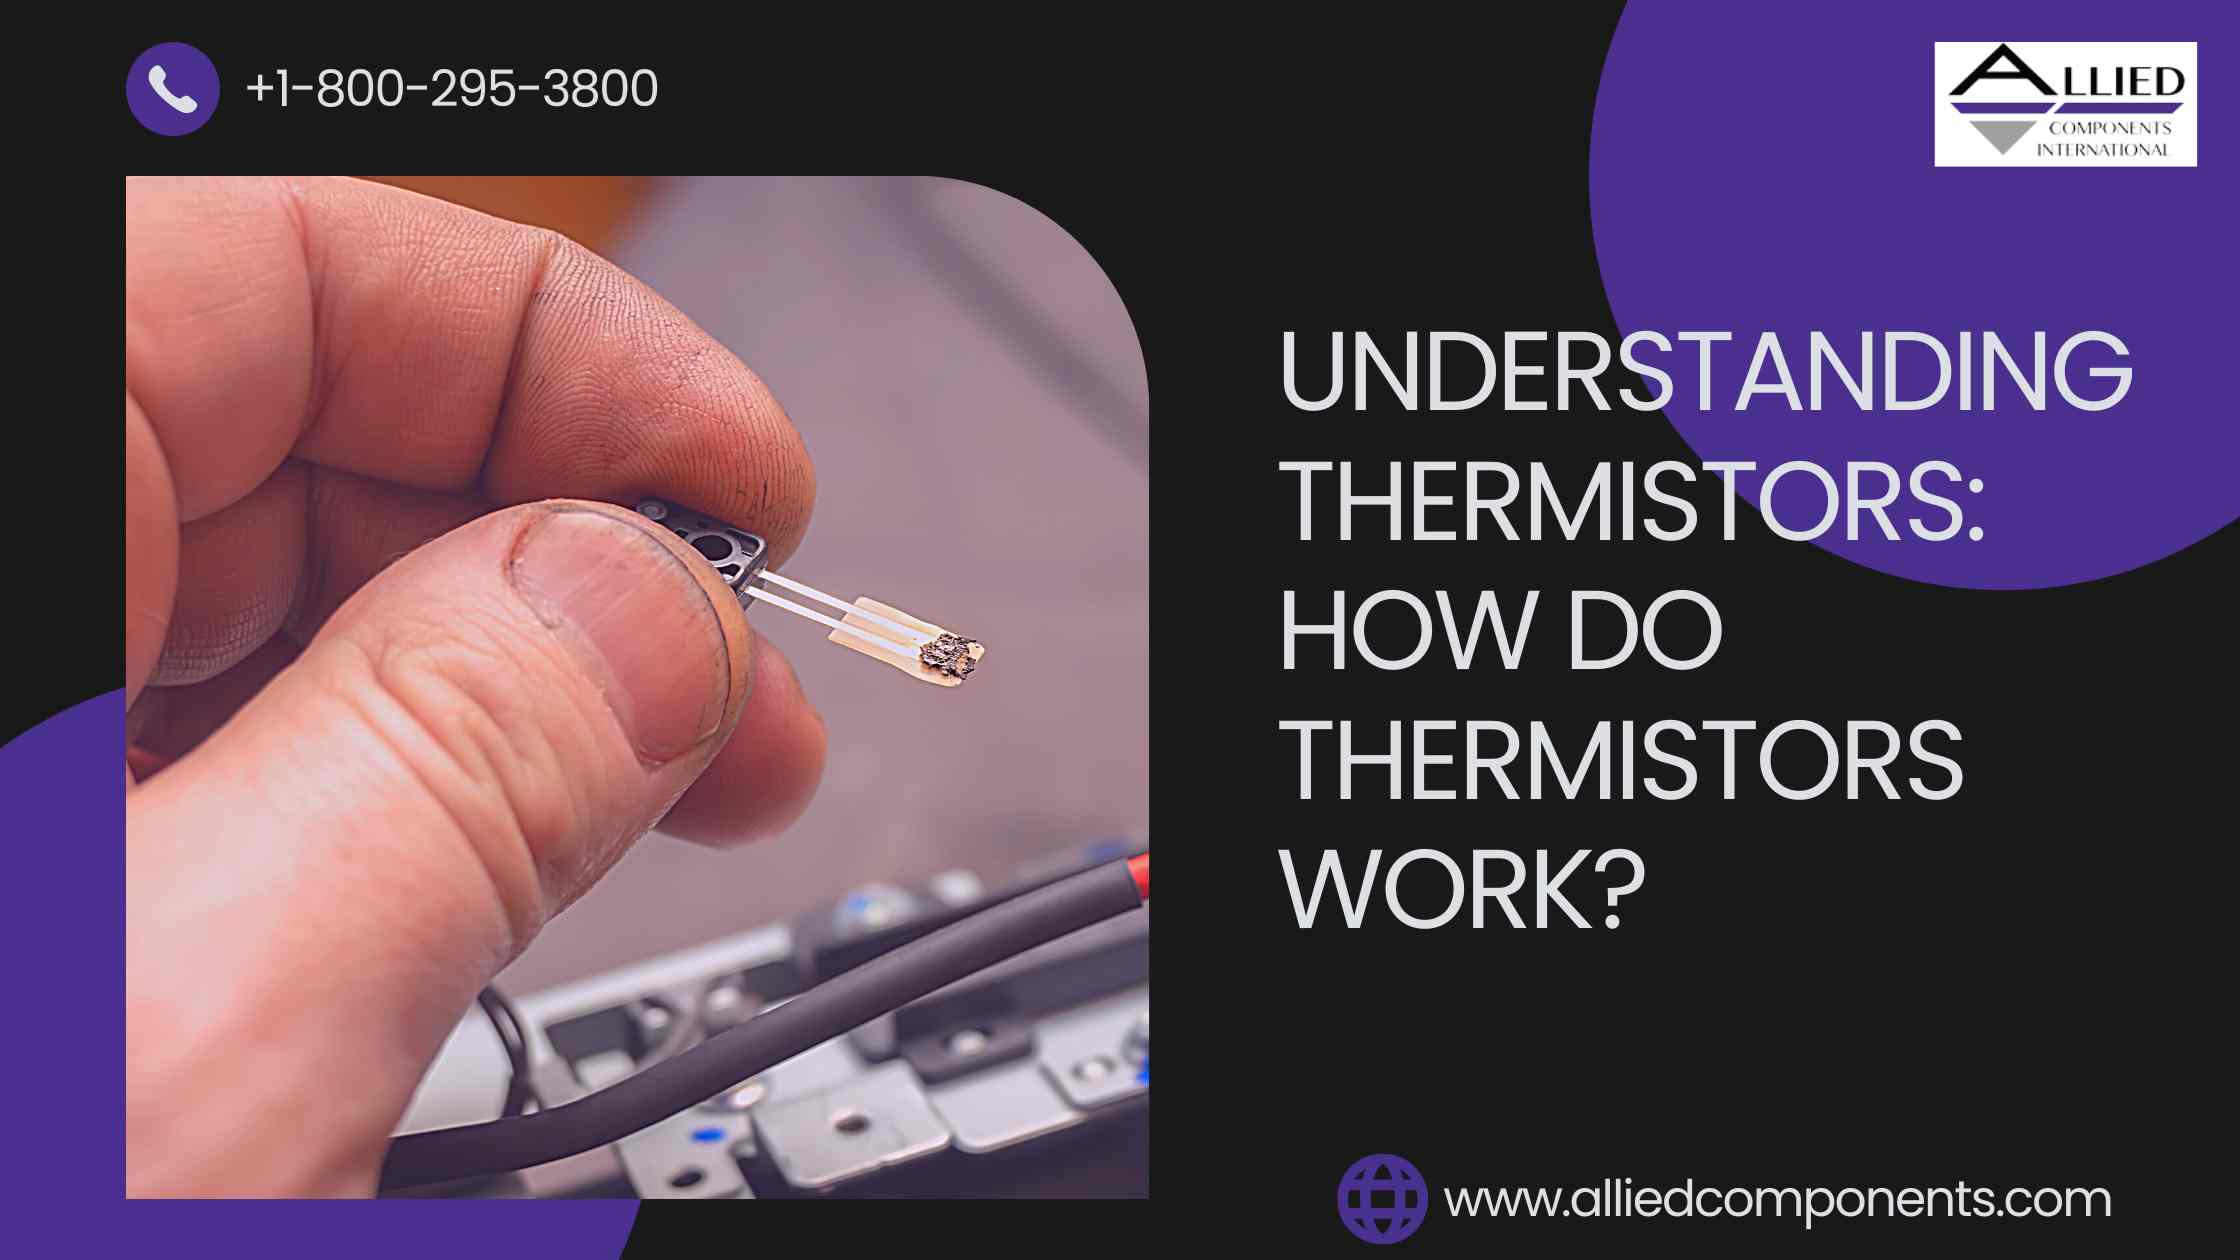 Using a Thermistor, Thermistor